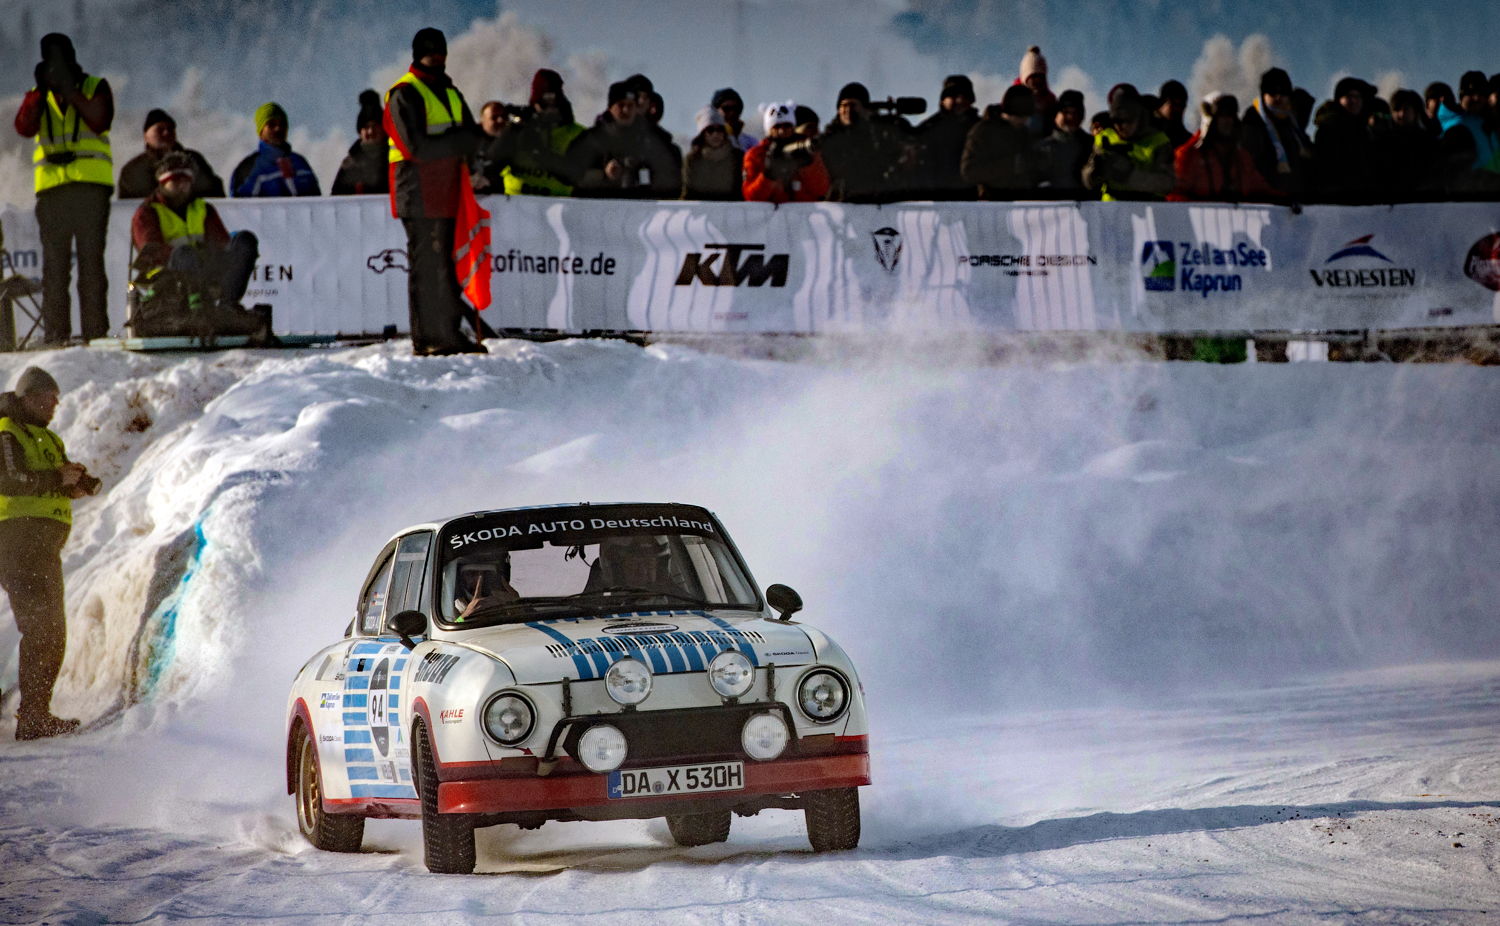 With his lightweight ŠKODA 130 RS, featuring rear wheel drive and 140 horse power, seven times German Rally Champion Matthias Kahle entertained thousands of fans around the ice track in Zell am See